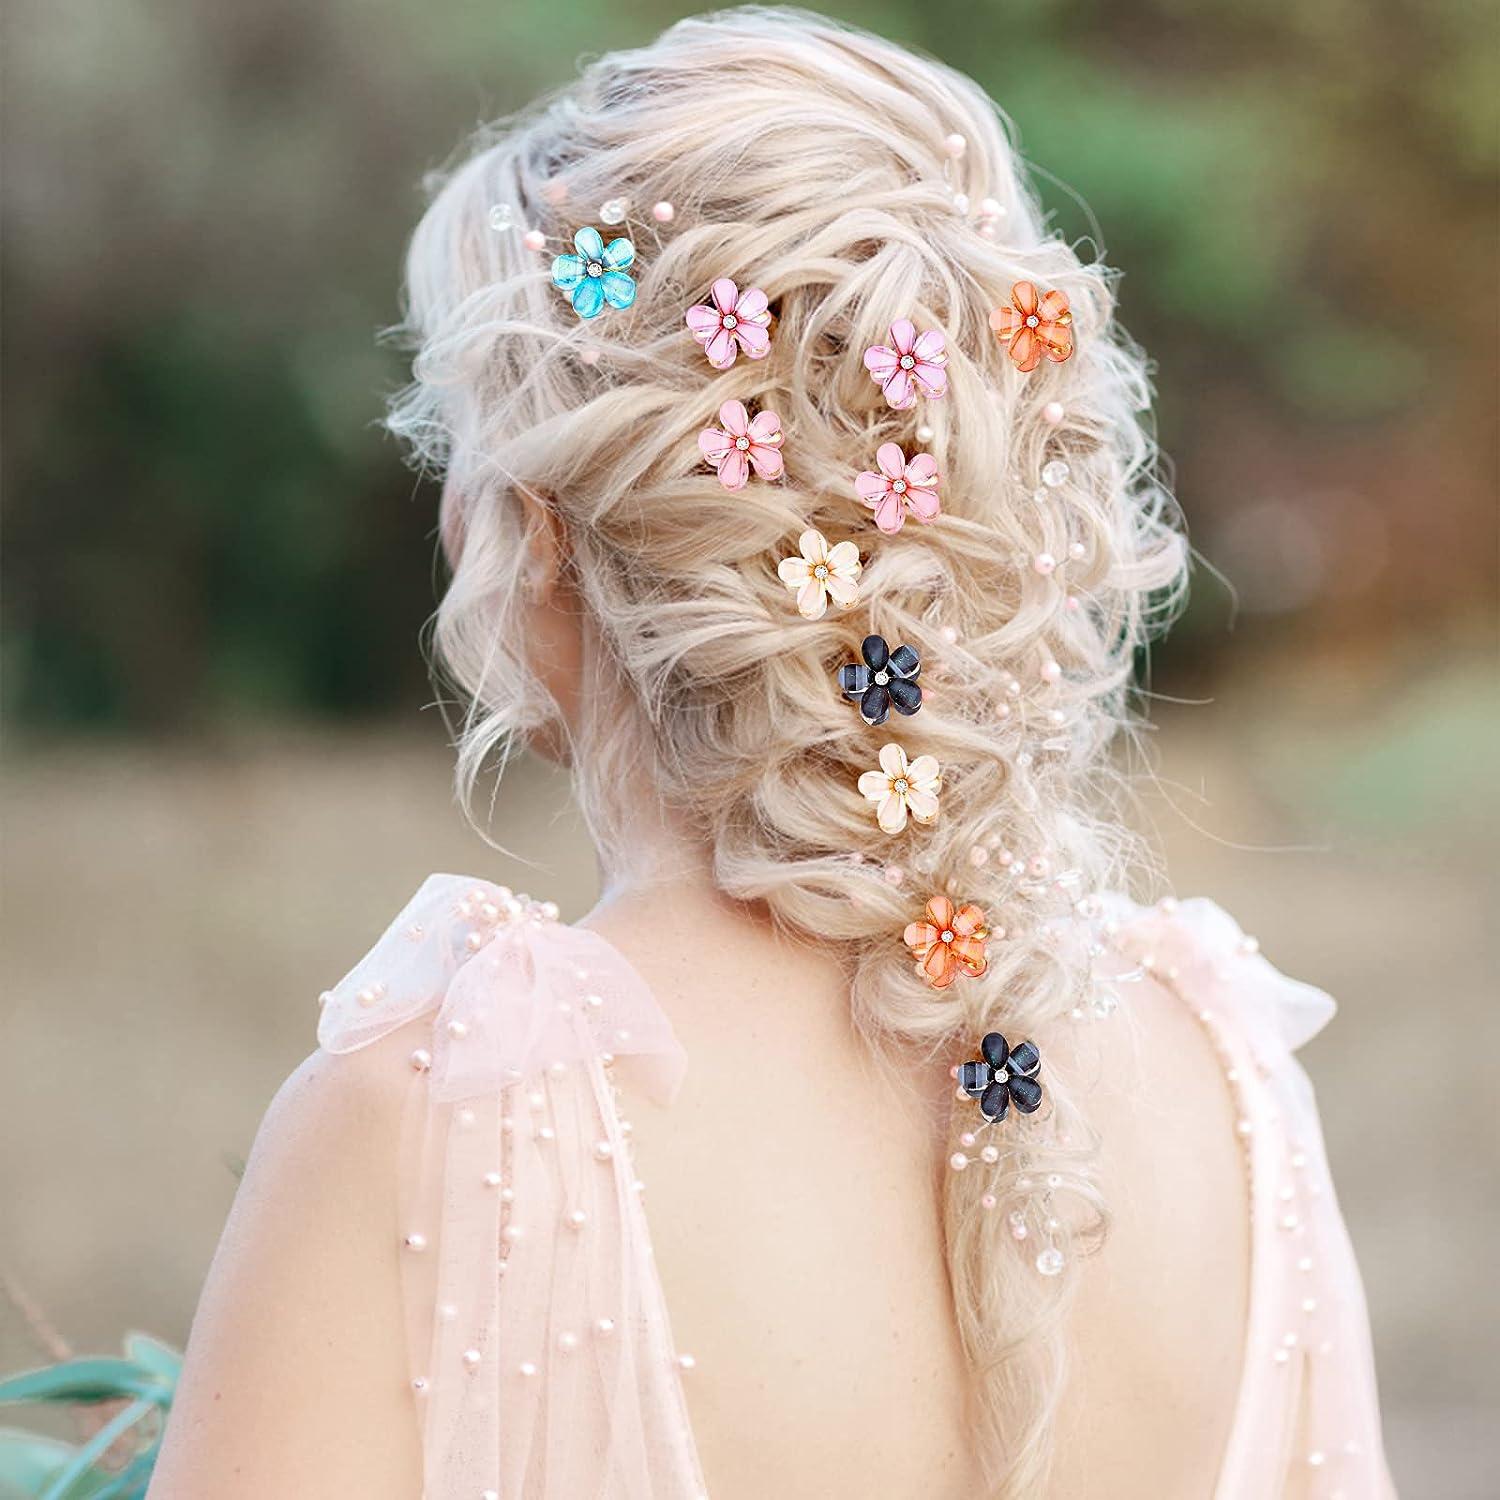 37 Ways to Wear Flowers in Your Hair on Your Wedding Day | Wedding  hairstyles for long hair, Long hair styles, Down hairstyles